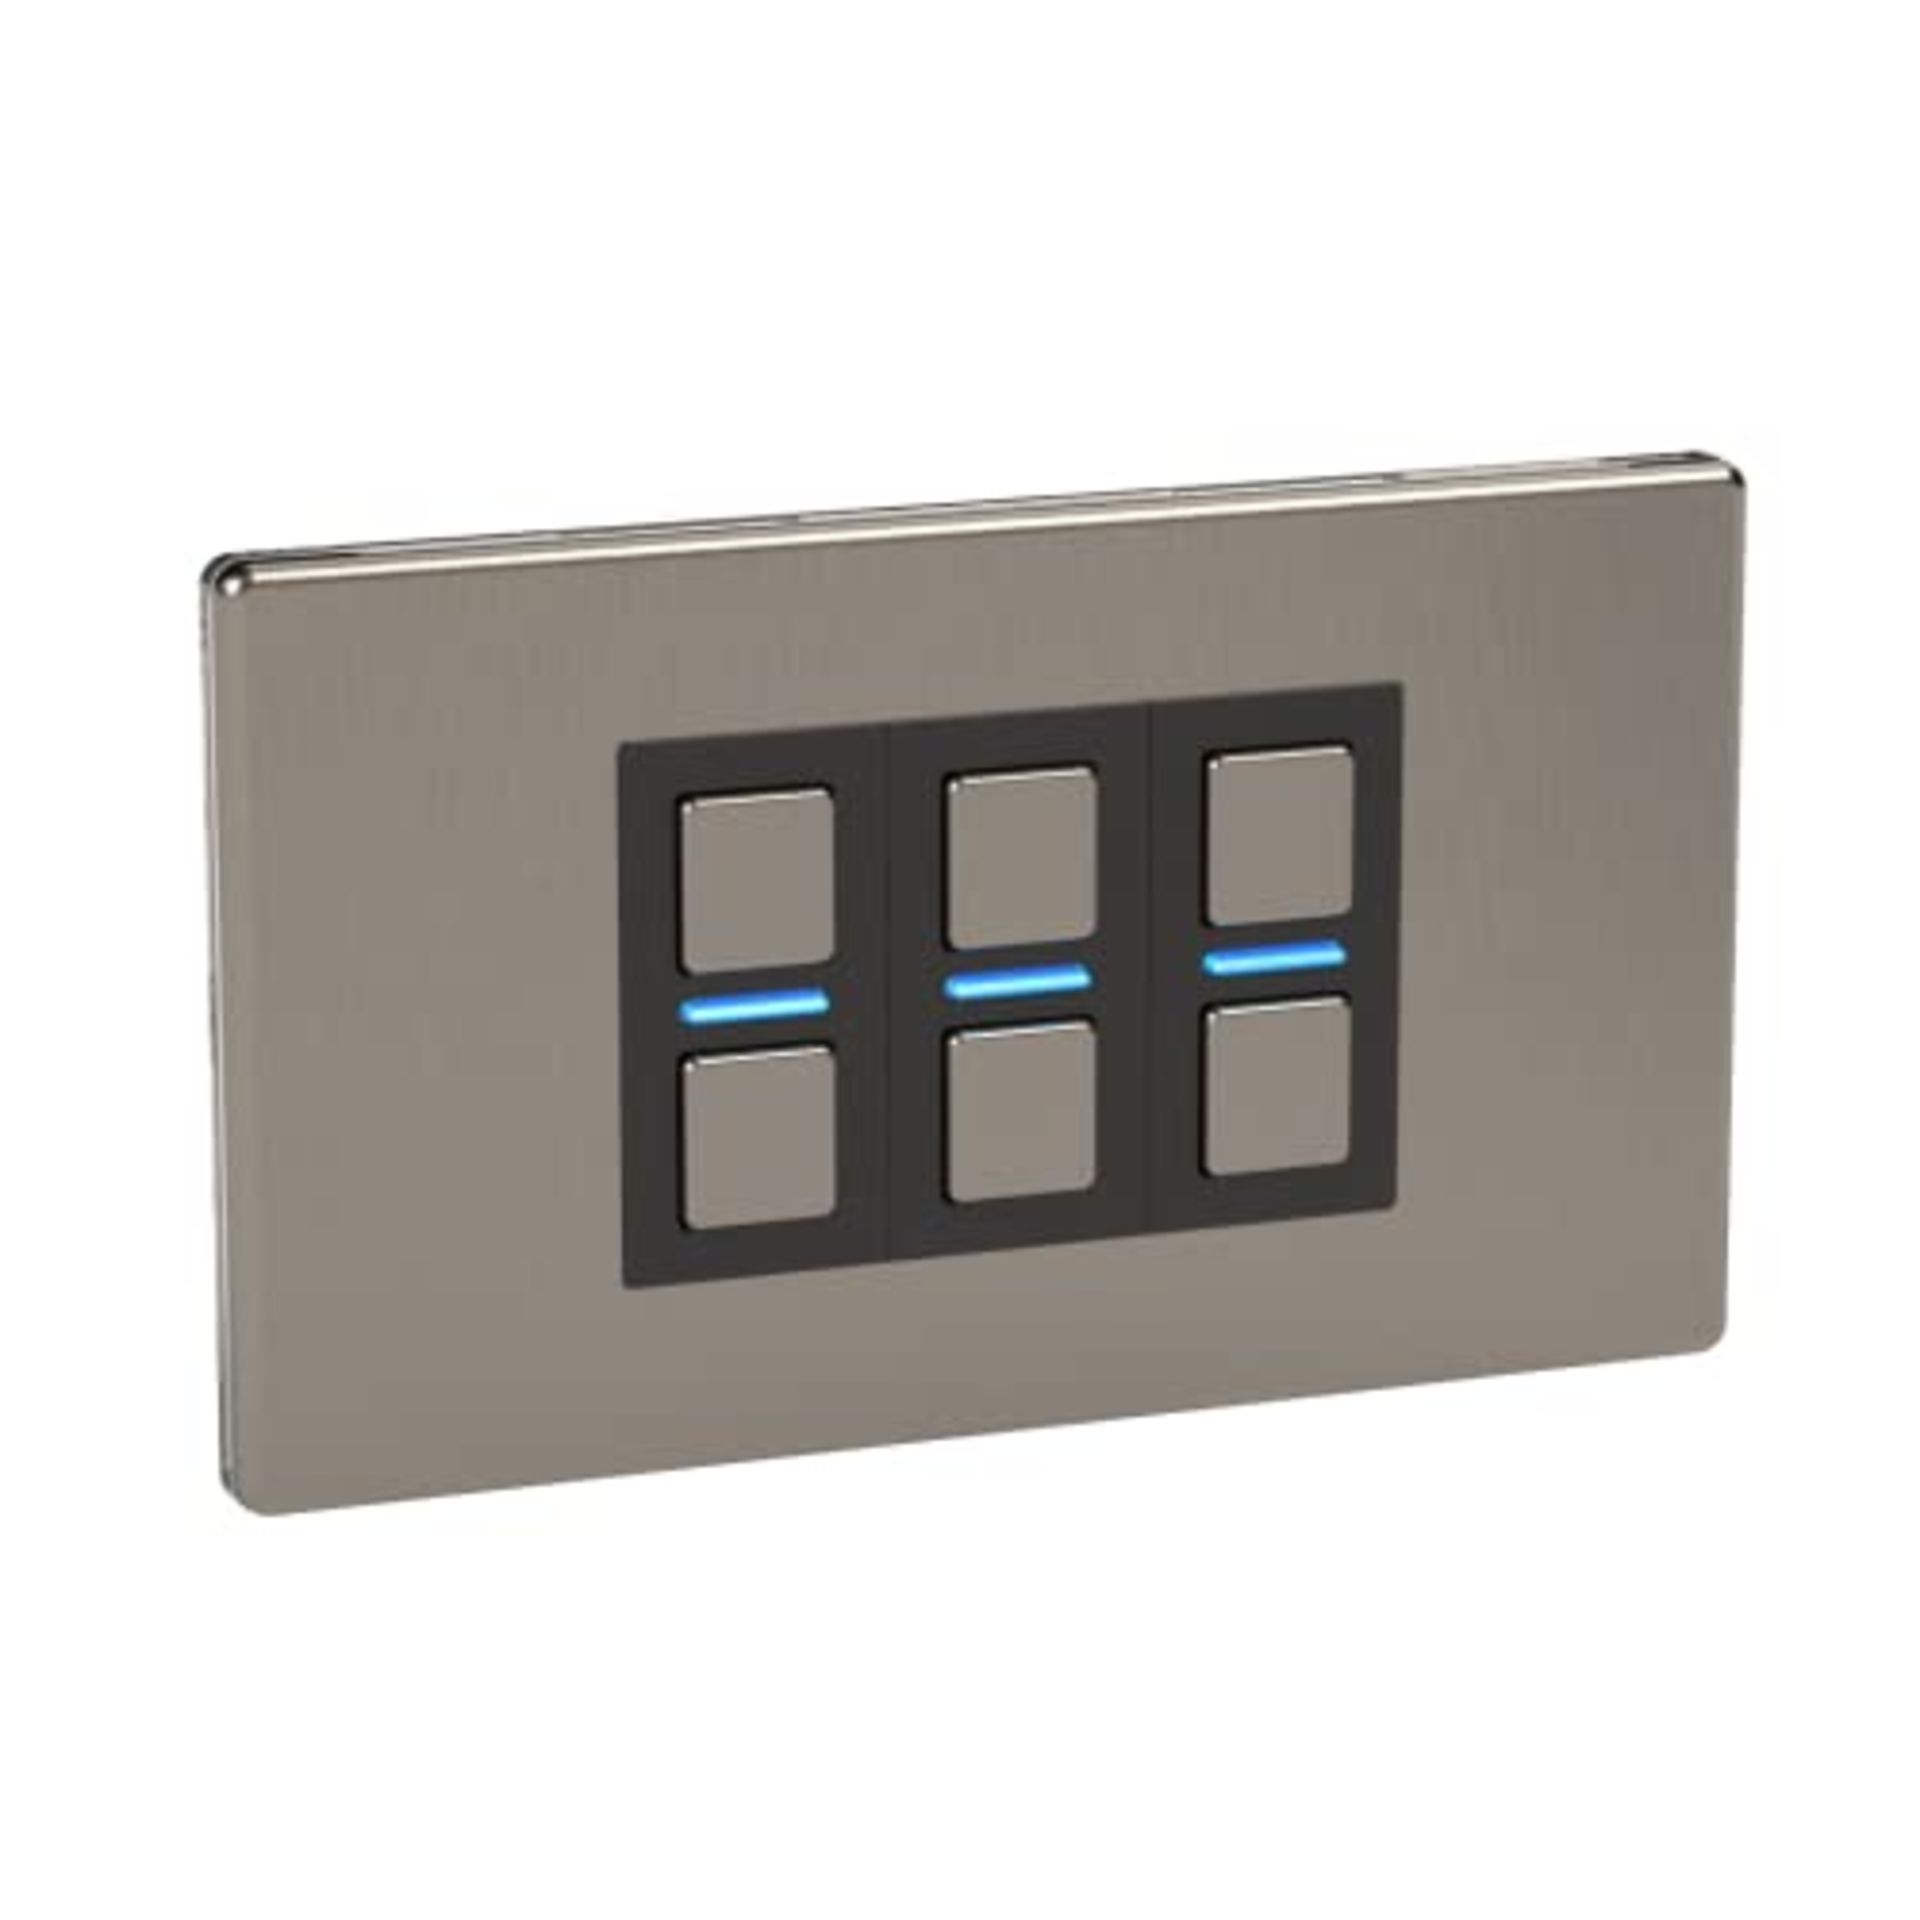 Lightwave LP23MK2 Smart Dimmer with Energy Monitoring, 3 Gang, Stainless Steel - Works with Alexa, 